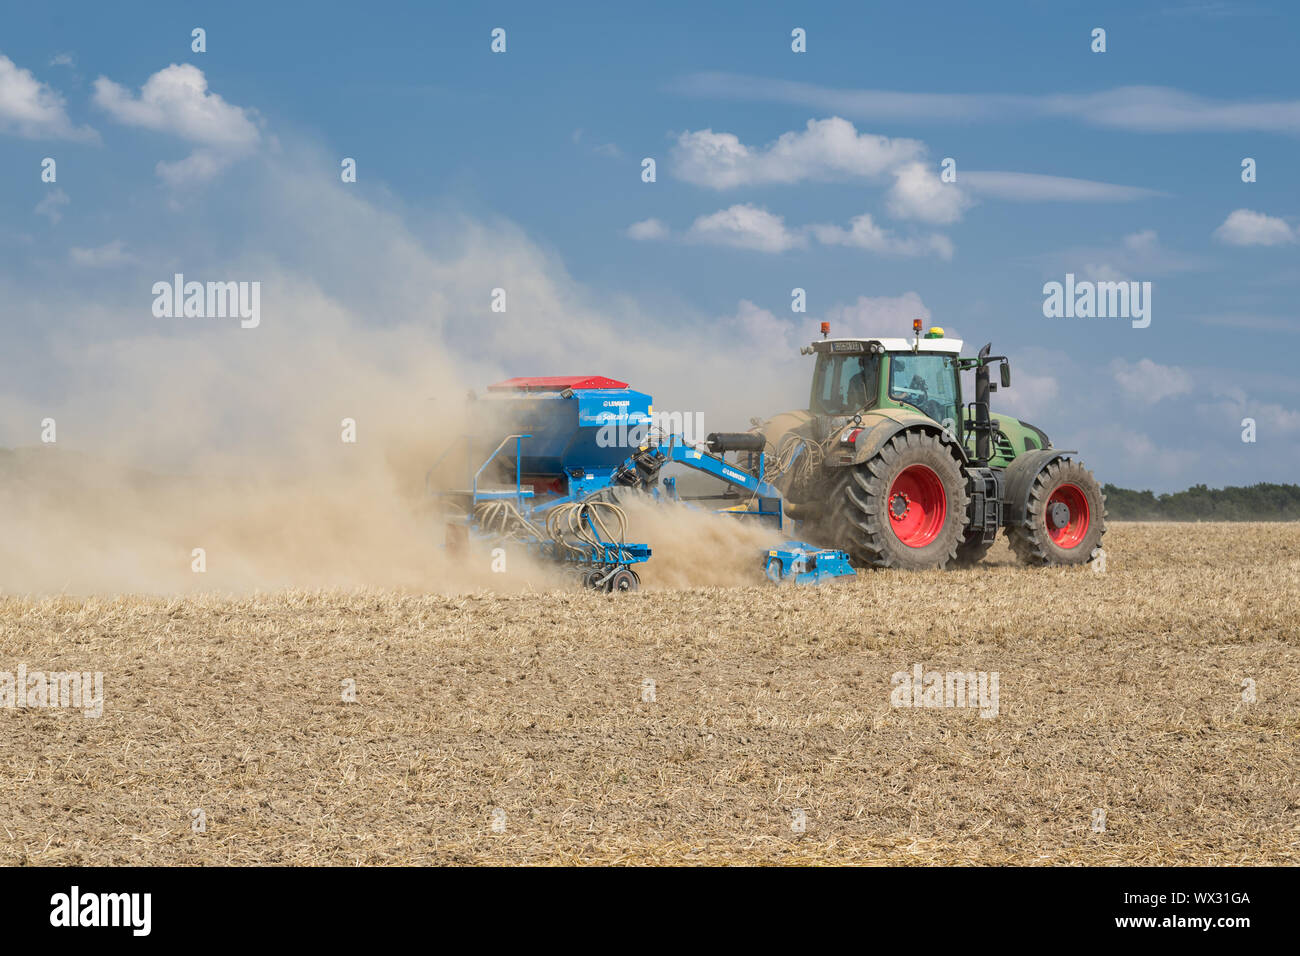 Tractor with a sowing machine working in the field Stock Photo